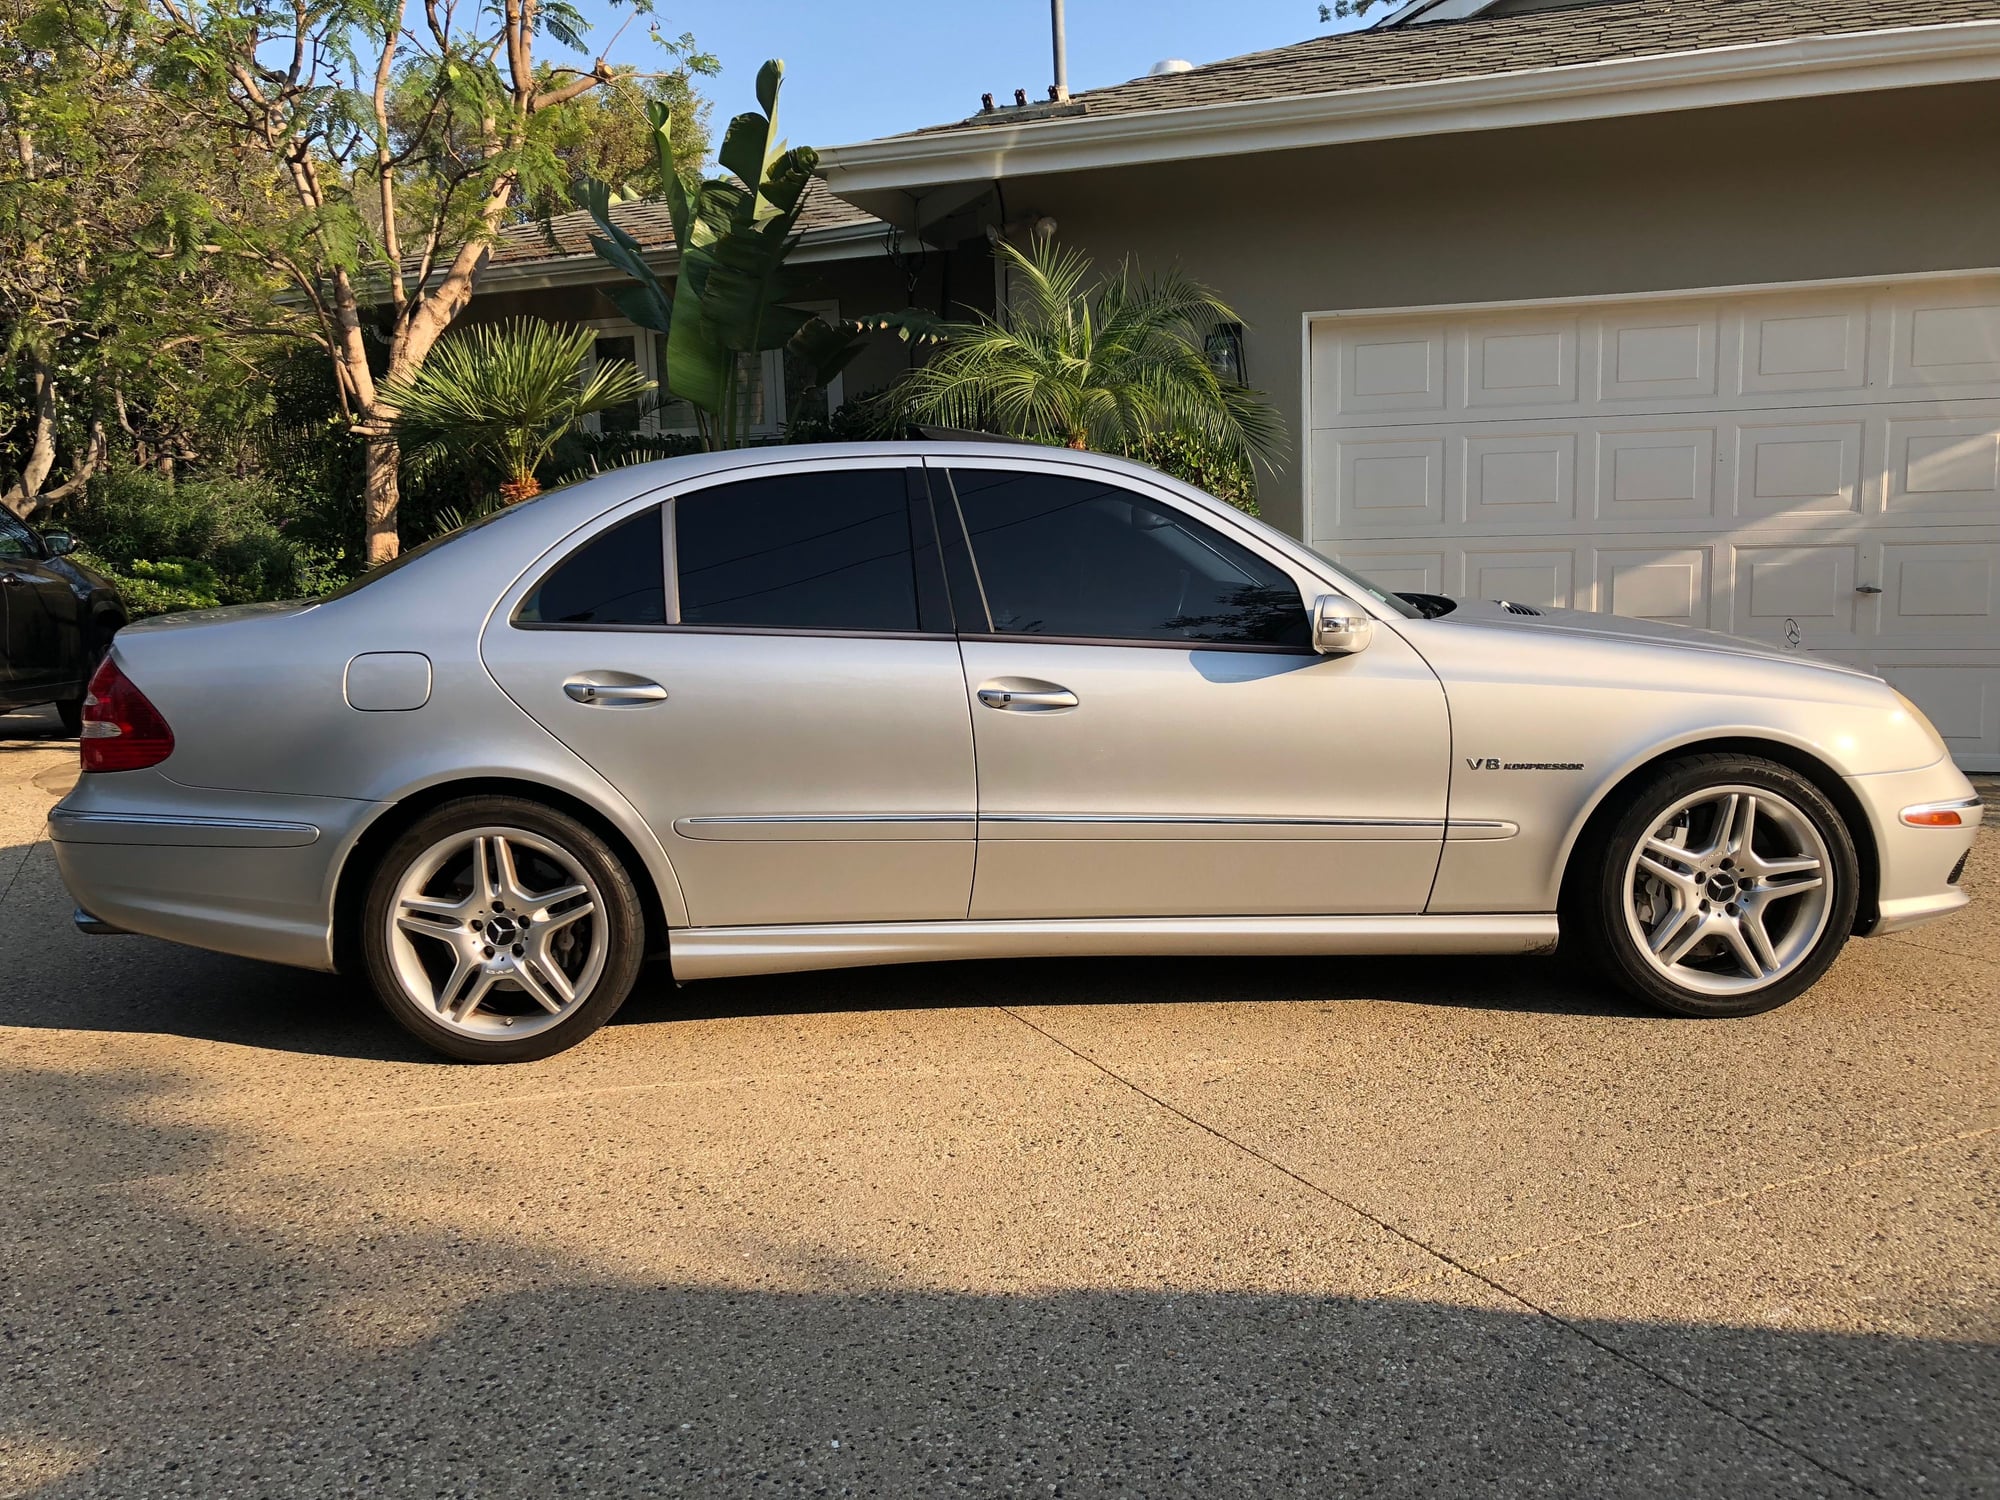 2003 Mercedes-Benz E55 AMG - This is by far THE BEST Mercedes EVER!!! - Used - VIN wdbuf76j83a291305 - 95,262 Miles - 8 cyl - 2WD - Automatic - Sedan - Silver - Los Angeles, CA 90064, United States